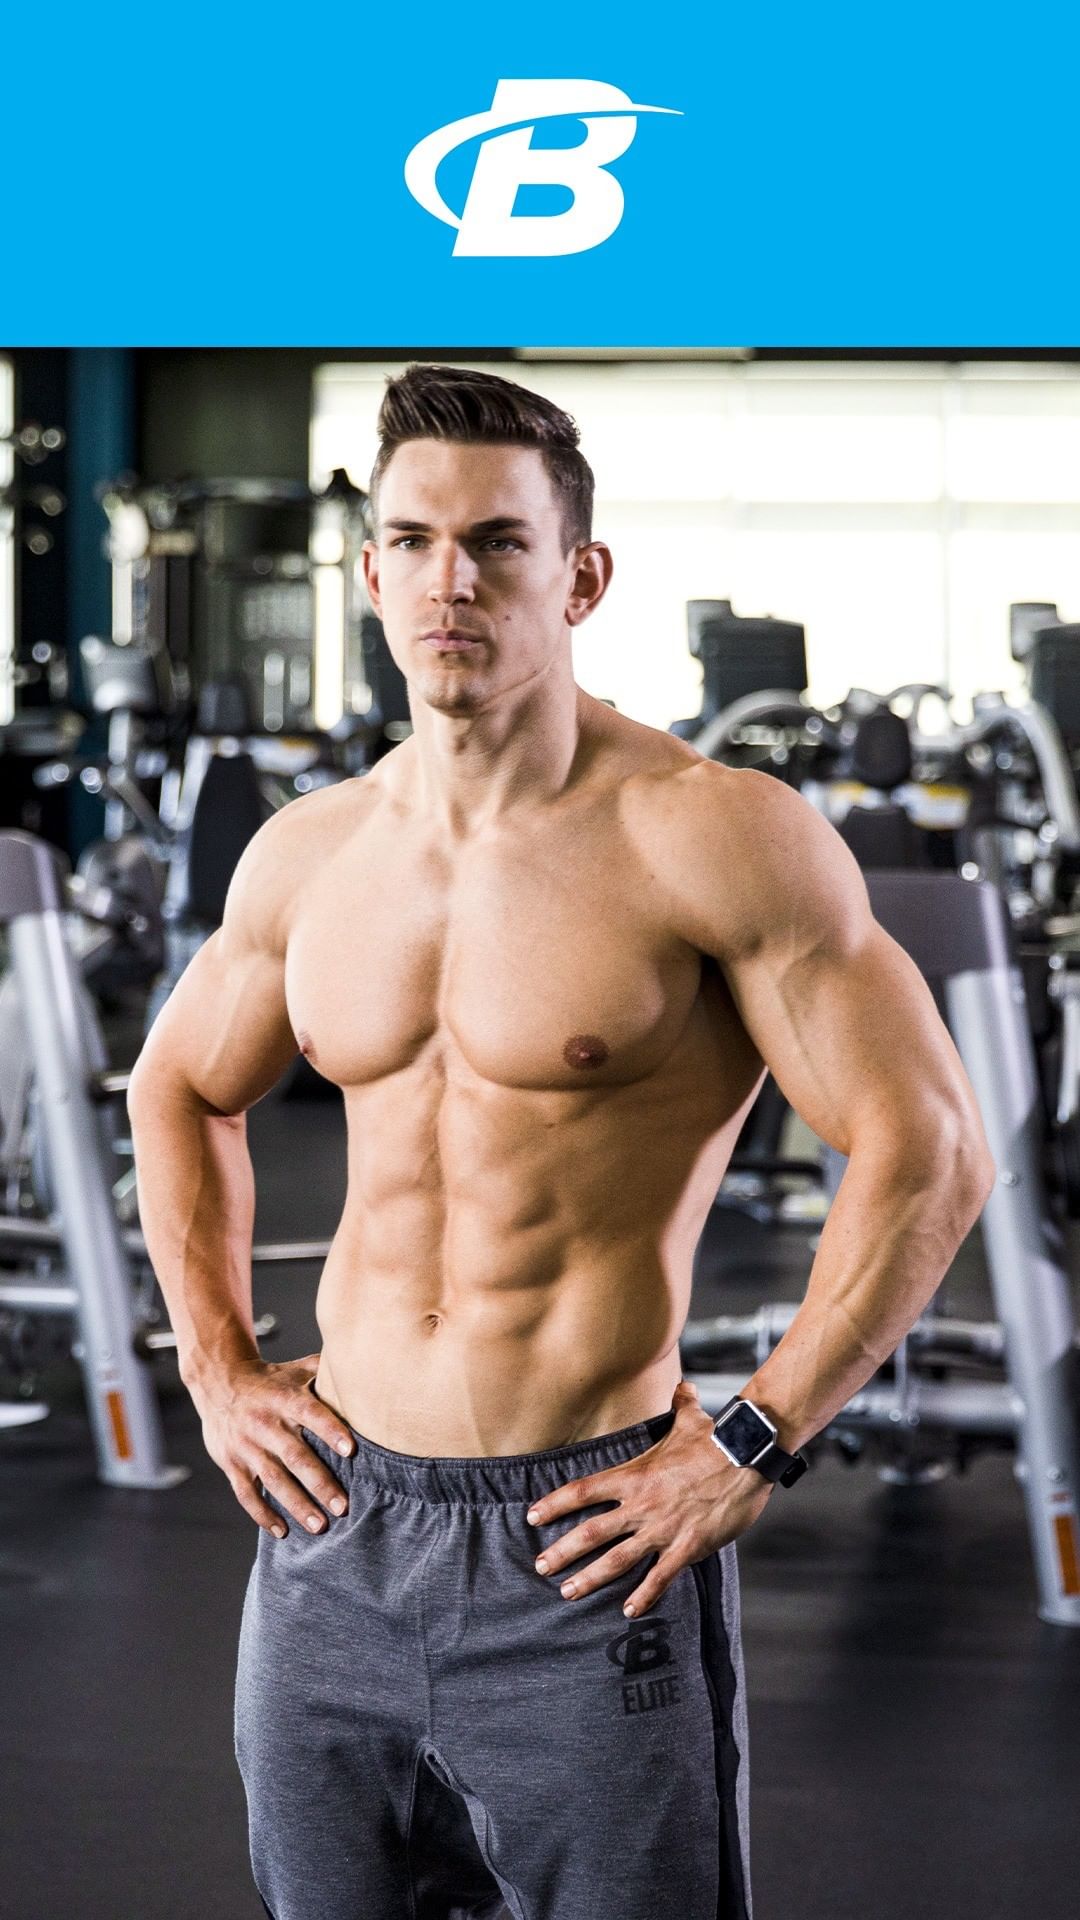 Bodybuilding.com - @abelbodygym  takes you through an hour of gut-wrenching work that will toughen up those abs, especially if they're hiding behind a roll of "stored energy."'

 ❗ Try Abel Albonetti'...